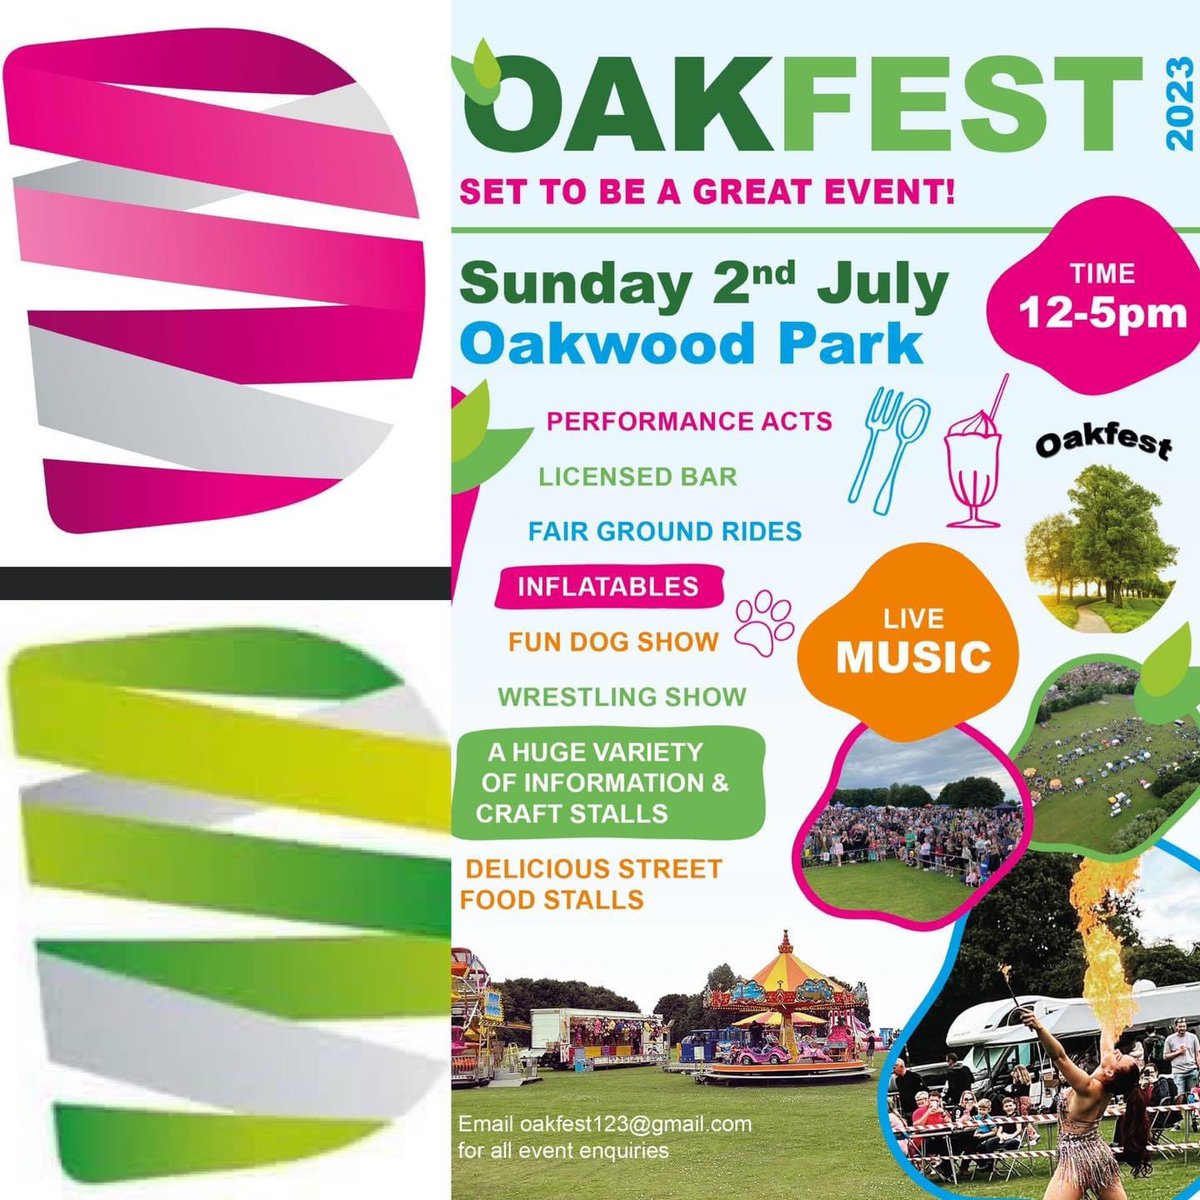 One week to go!!! 

Oakfest is set to be bigger and better this year. Come along and see for yourself 🕺 🌳 🎶 💚

#oakwoodpark #communityevents